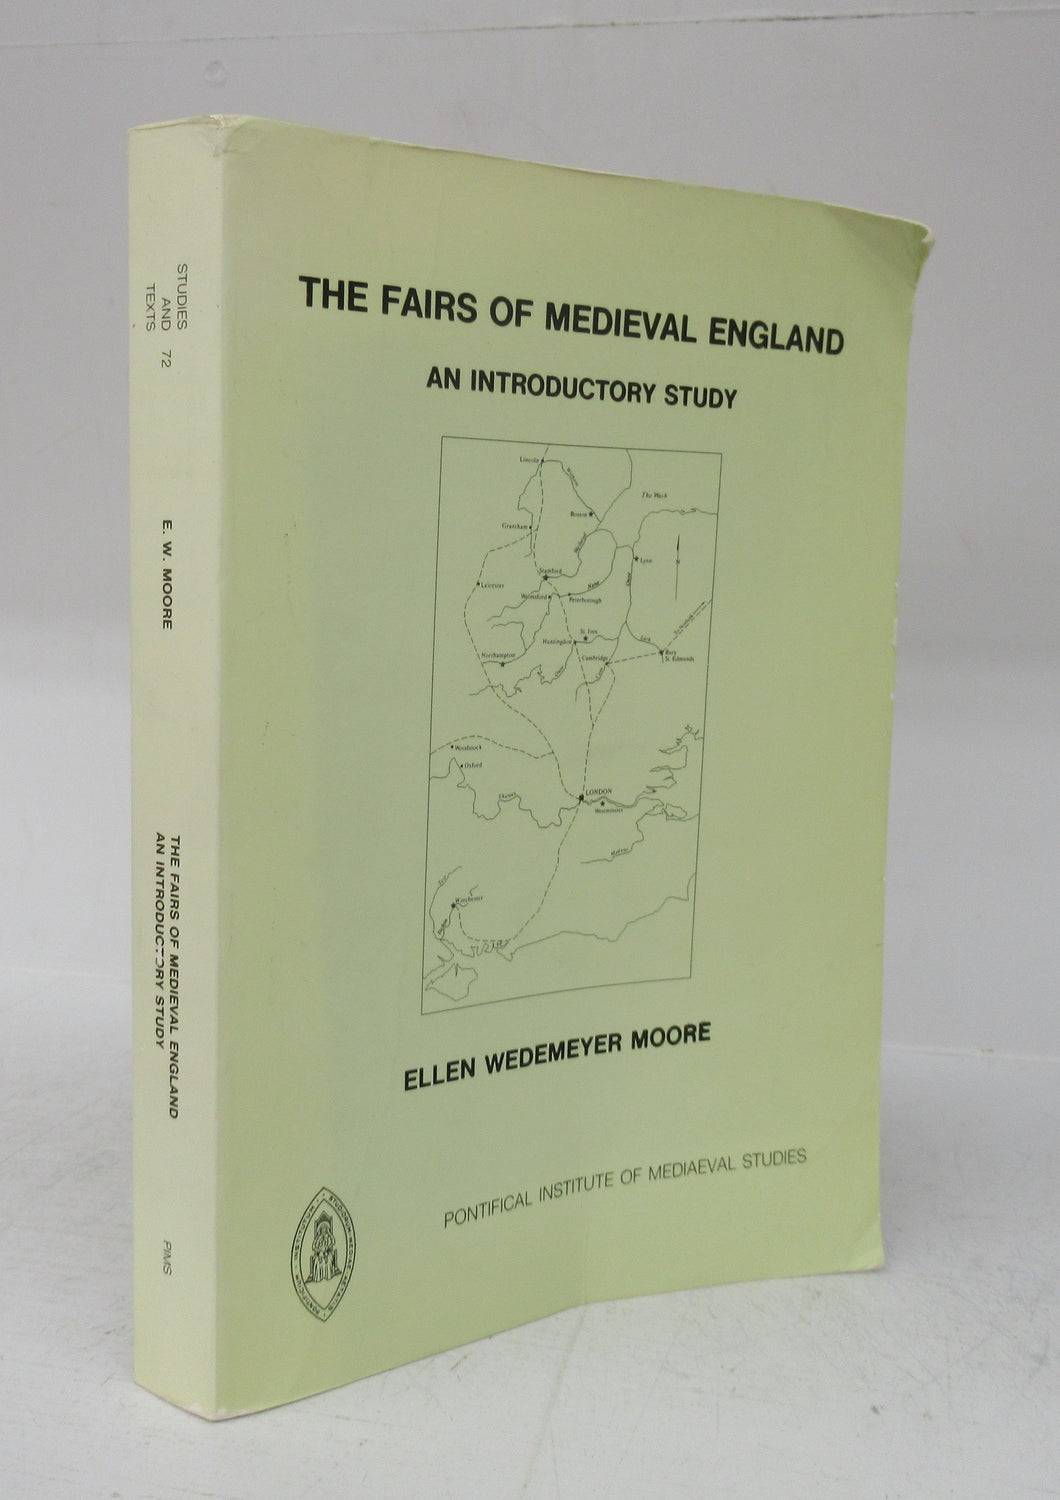 The Fairs of Medieval England: An Introductory Study